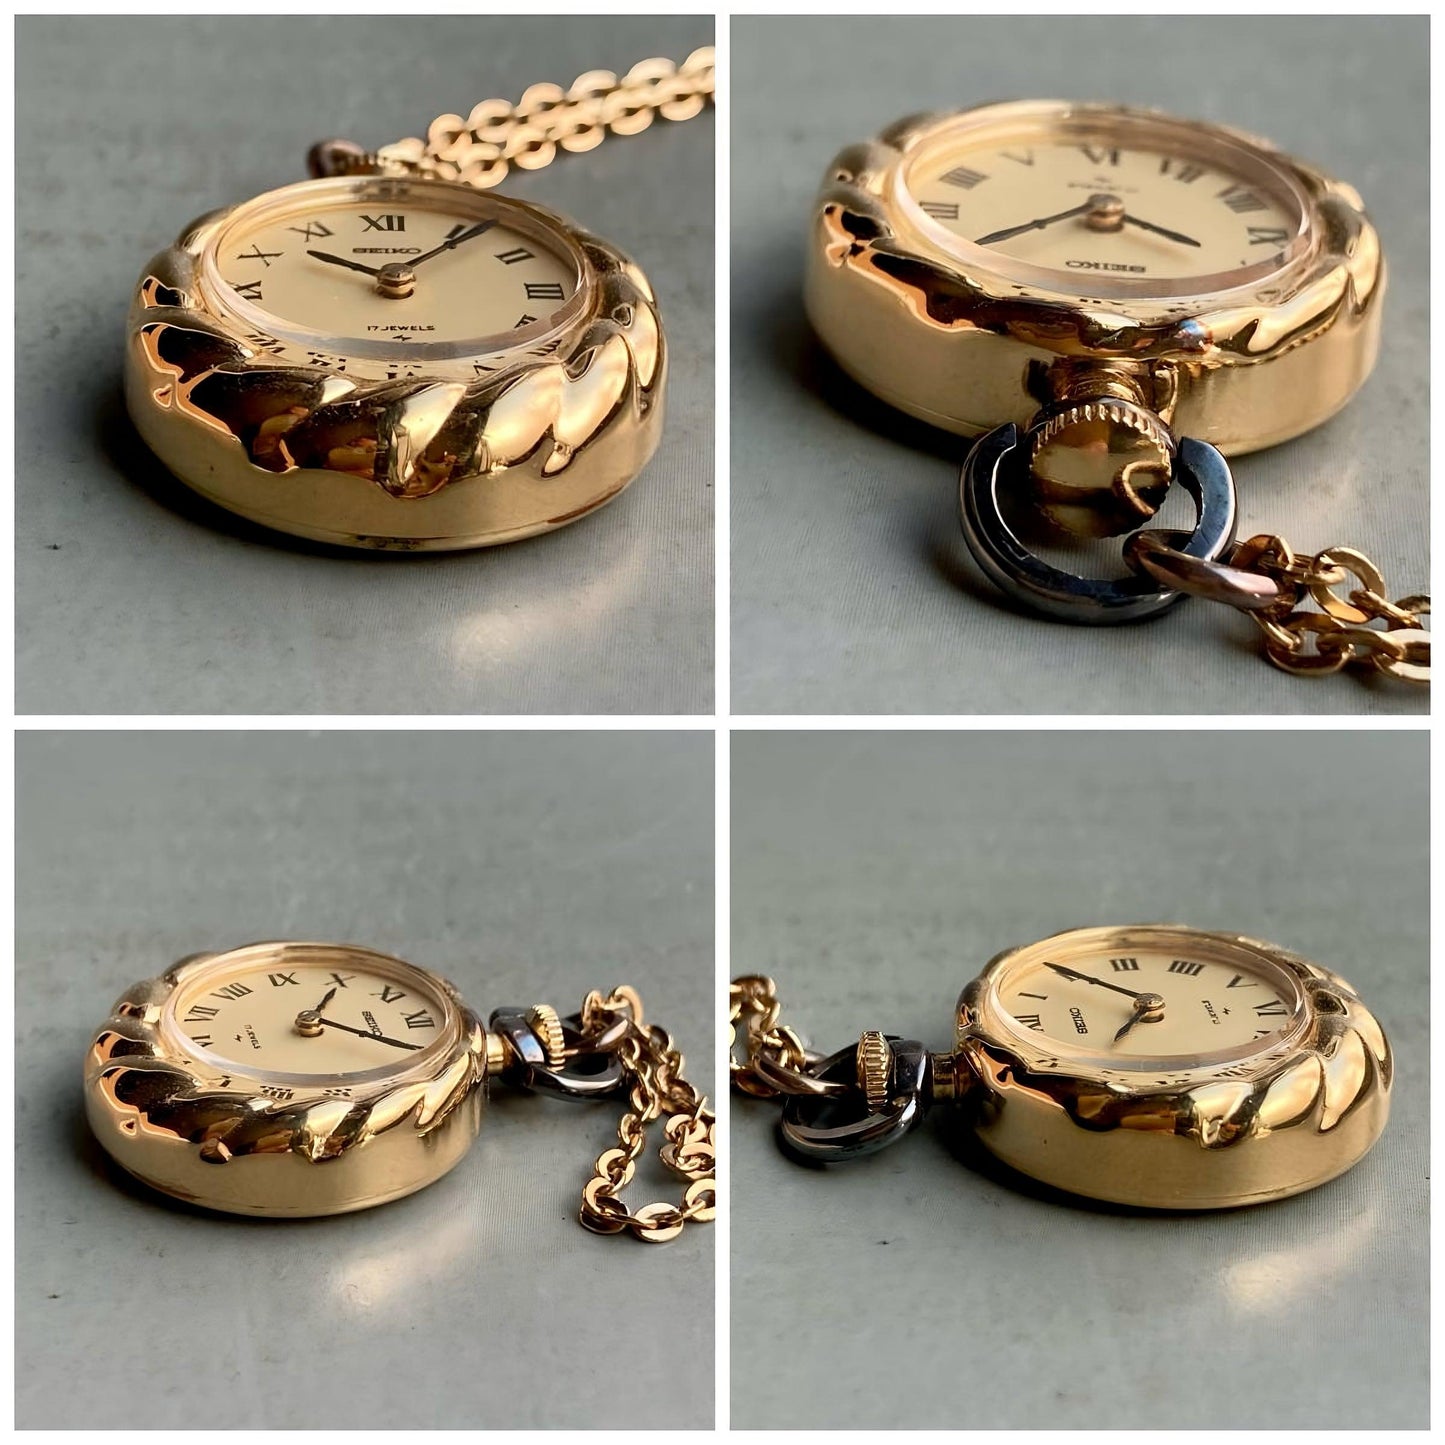 Seiko Pocket Watch Pendant Watch with Chain Case 23mm Vintage Gold - Murphy Johnson Watches Co.